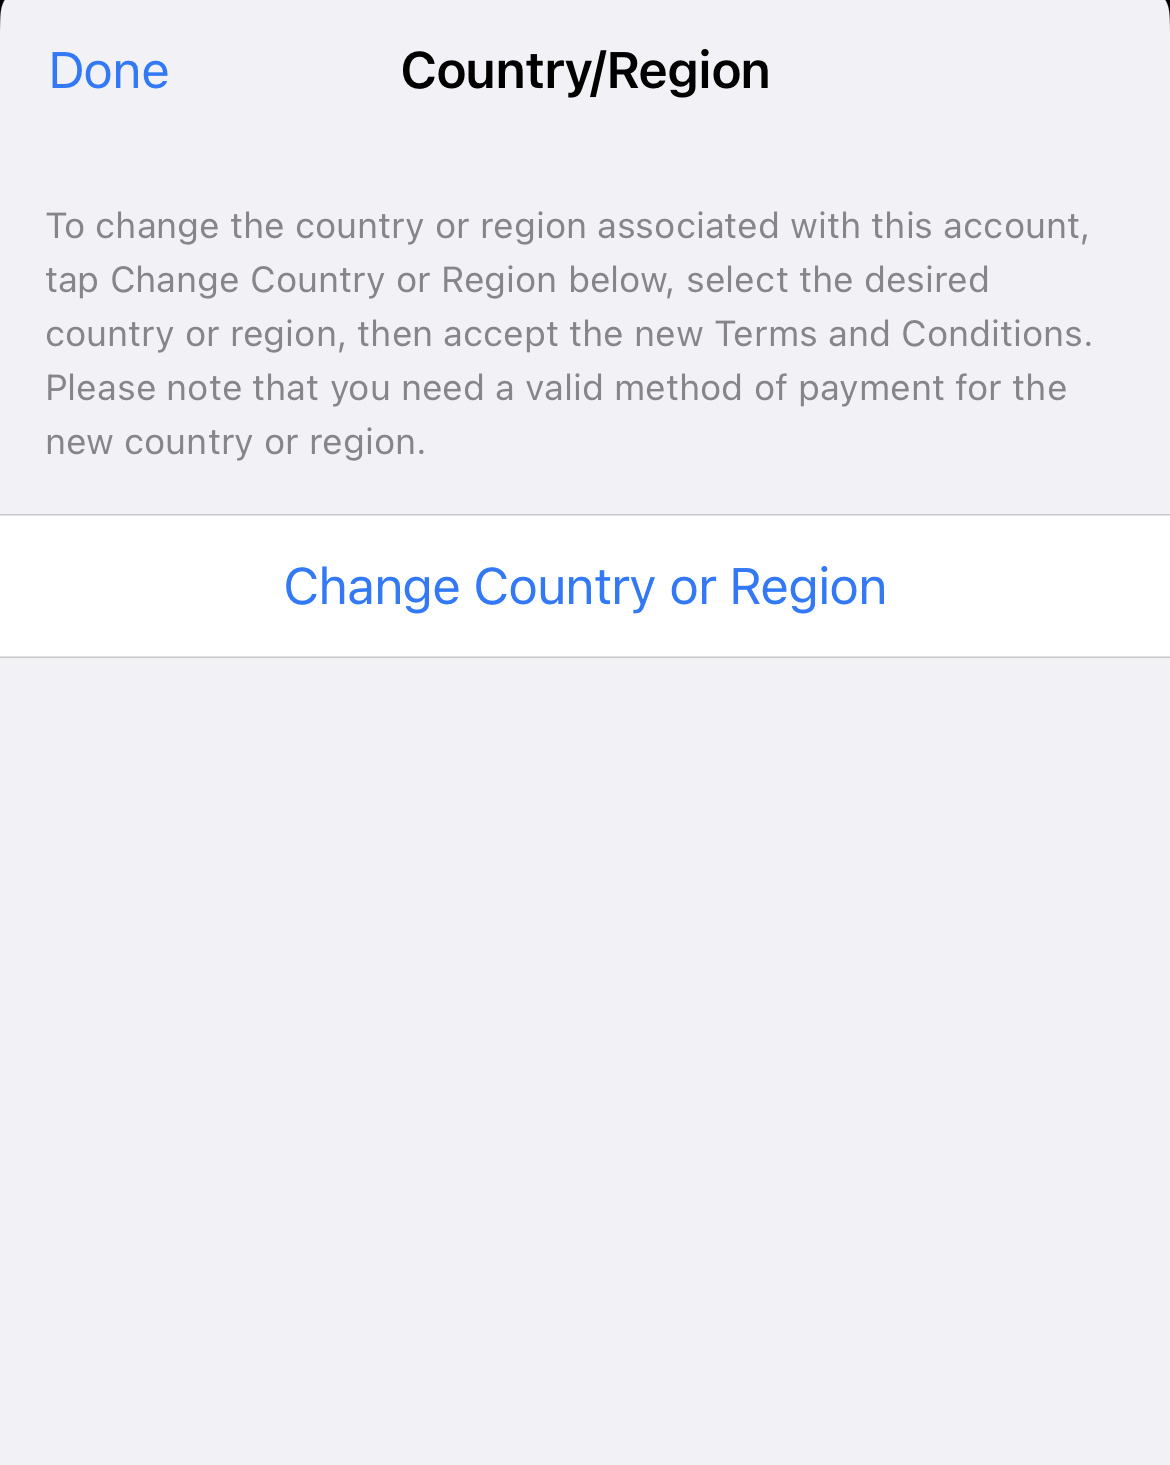 click Change Country or Region